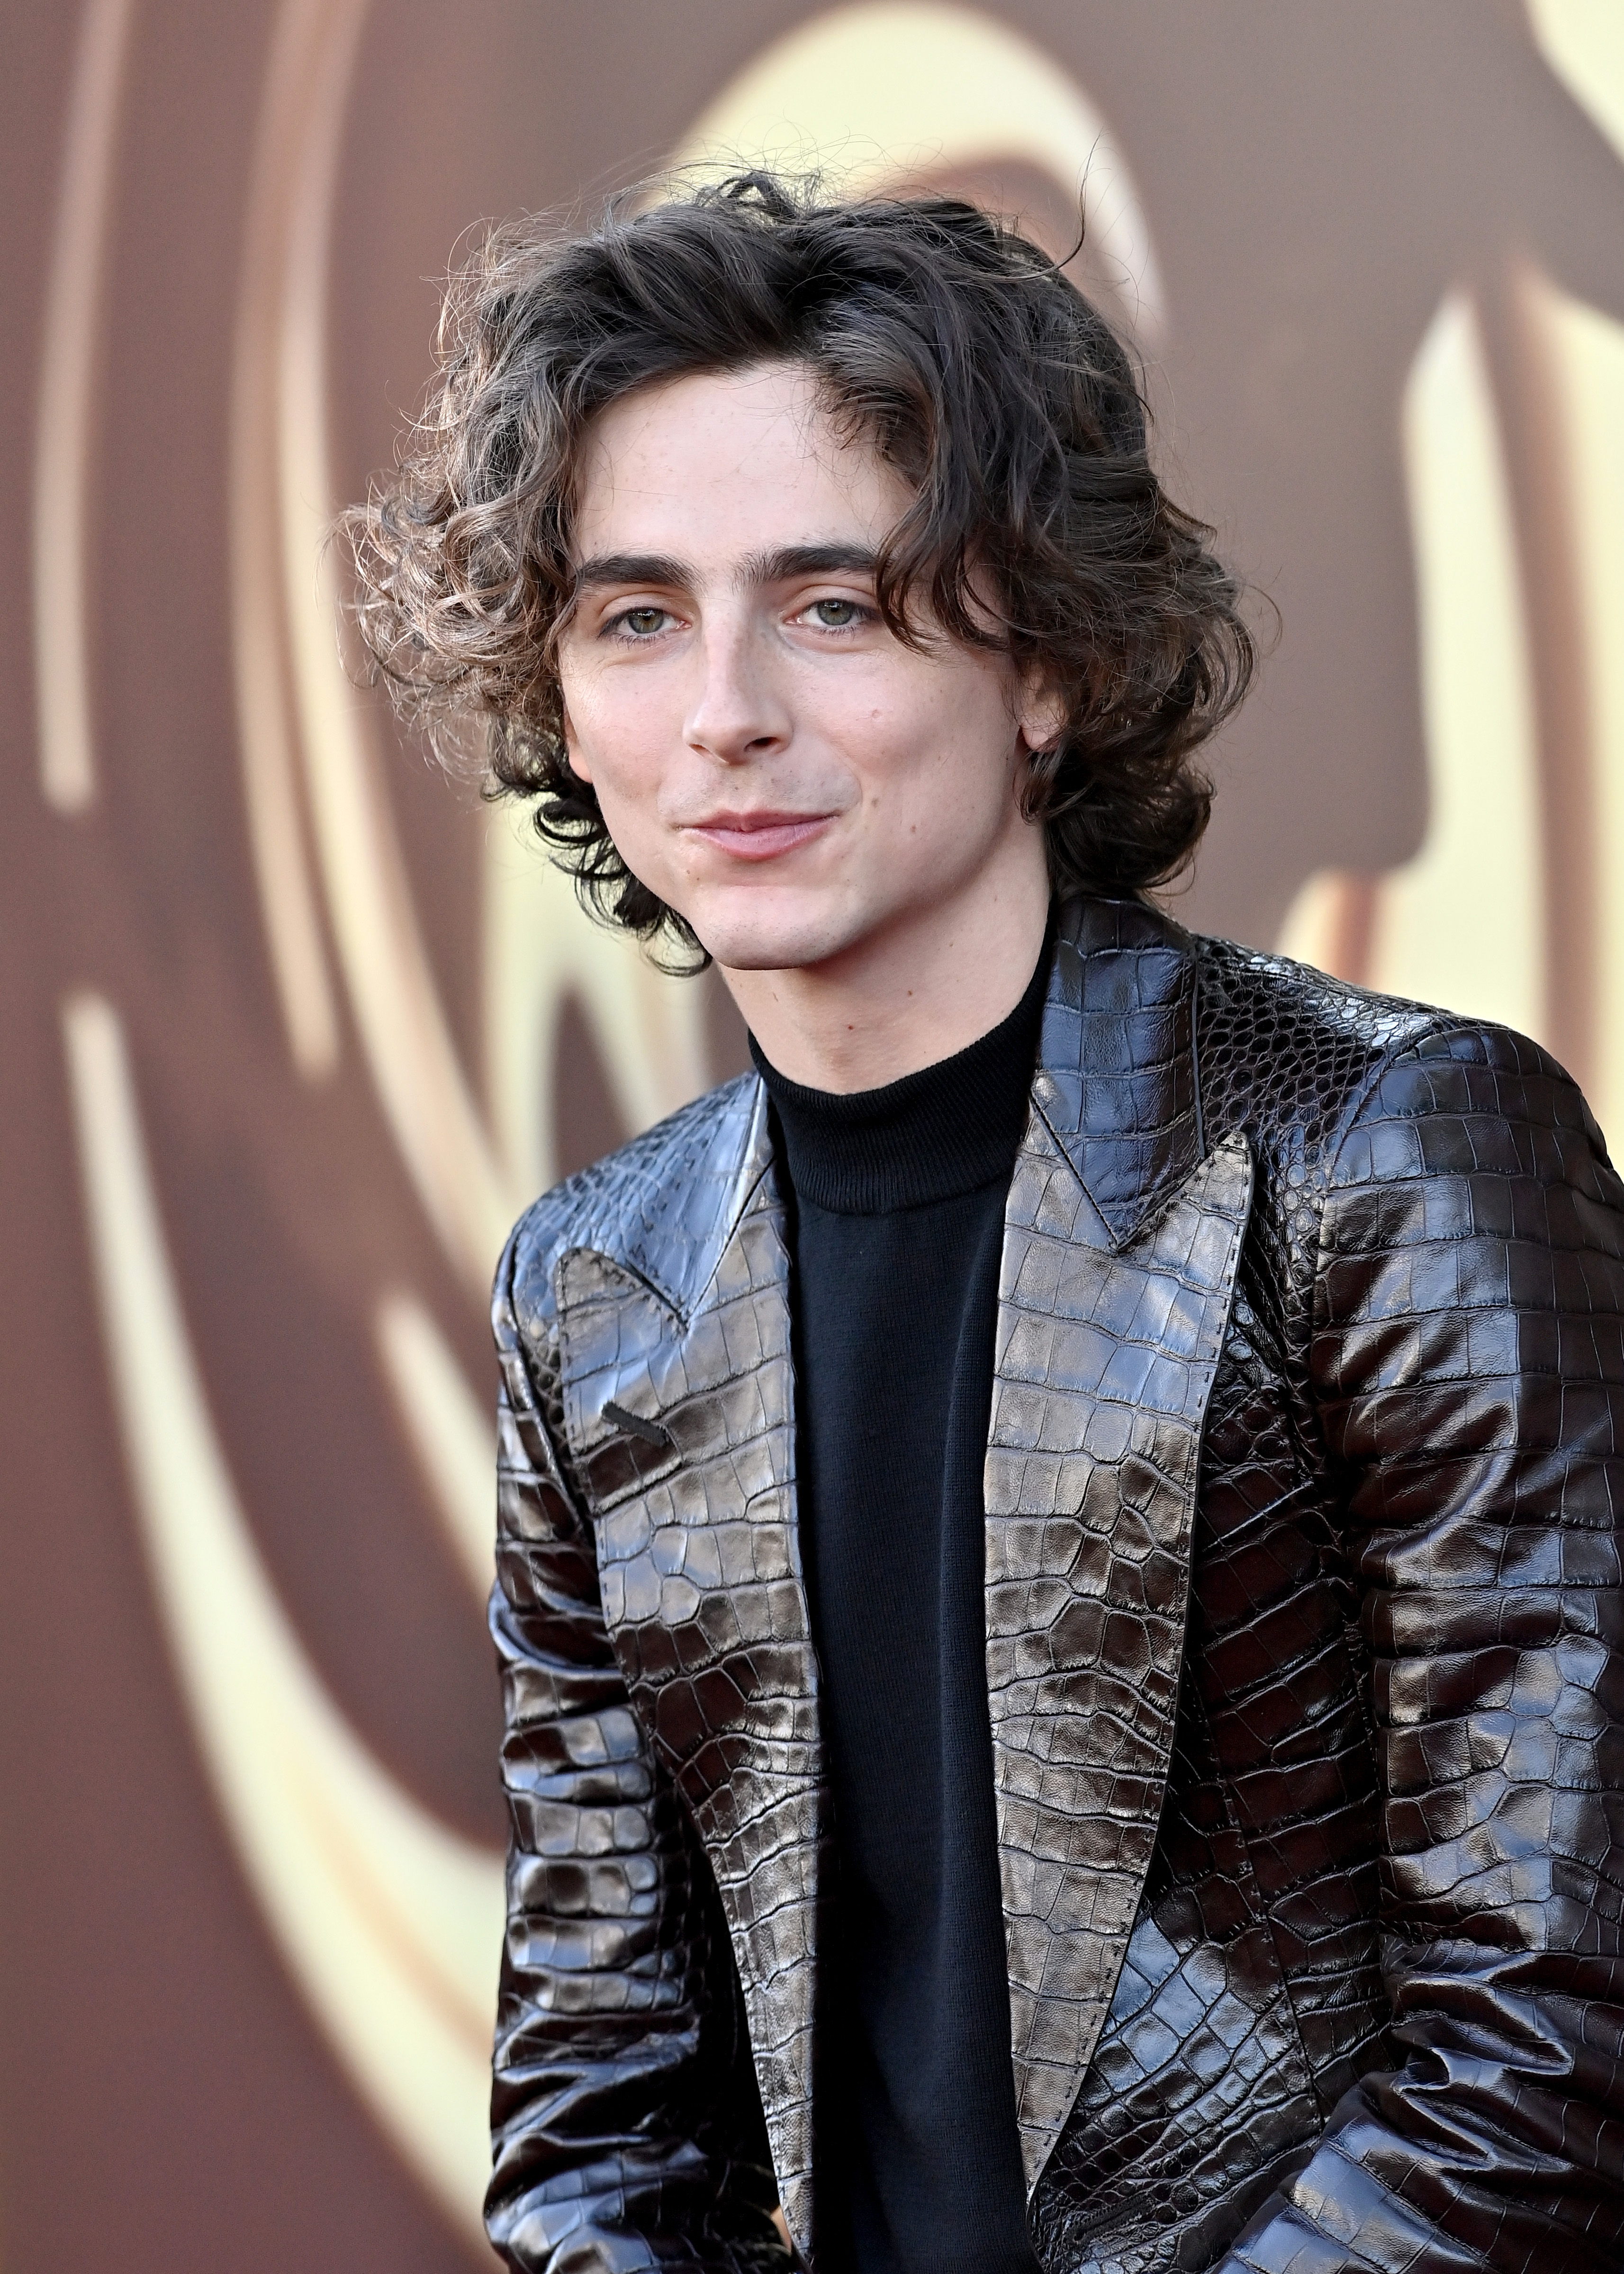 Close-up of Timothée in a shiny suit jacket